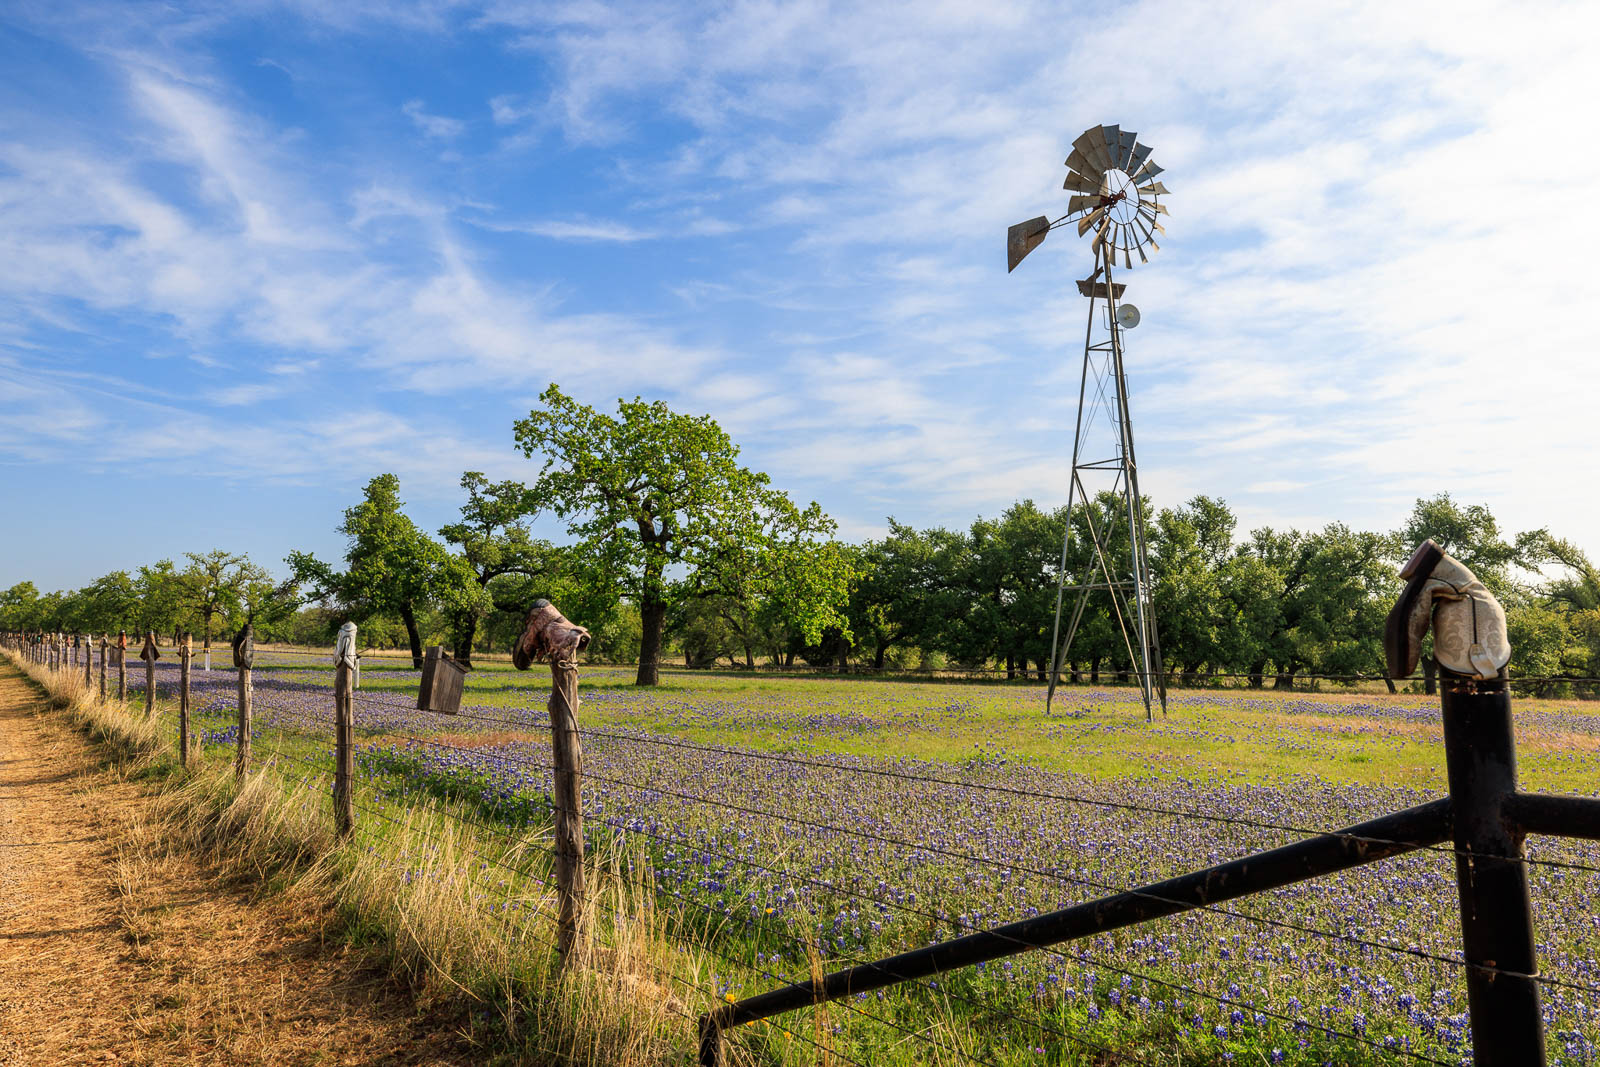 Insider’s Guide: So, You Want to Buy a Texas Ranch?